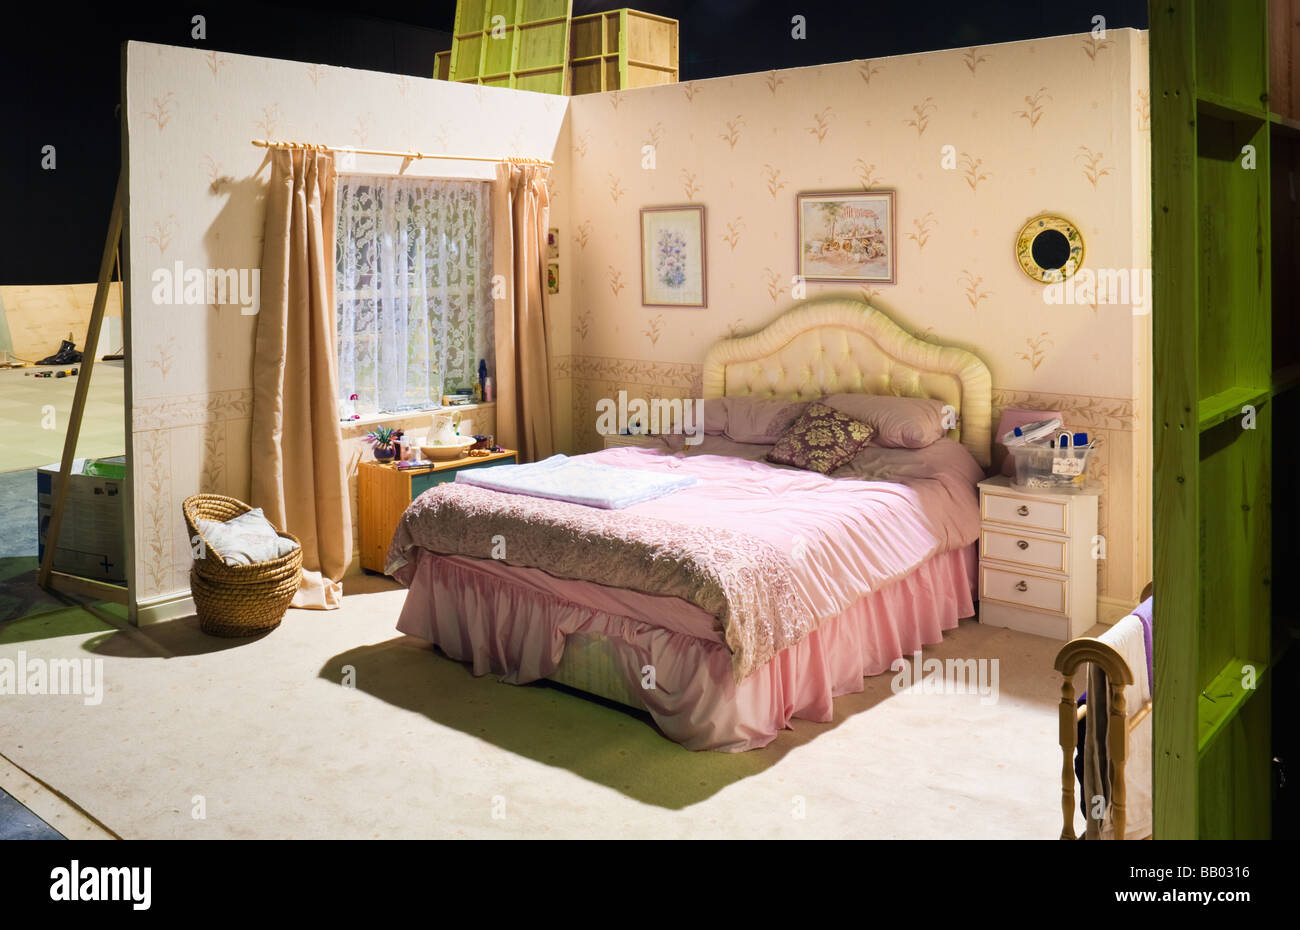 TV Studio - Stage set - Scenery set made to look like a bedroom to film a television drama in a TV studio, UK Stock Photo